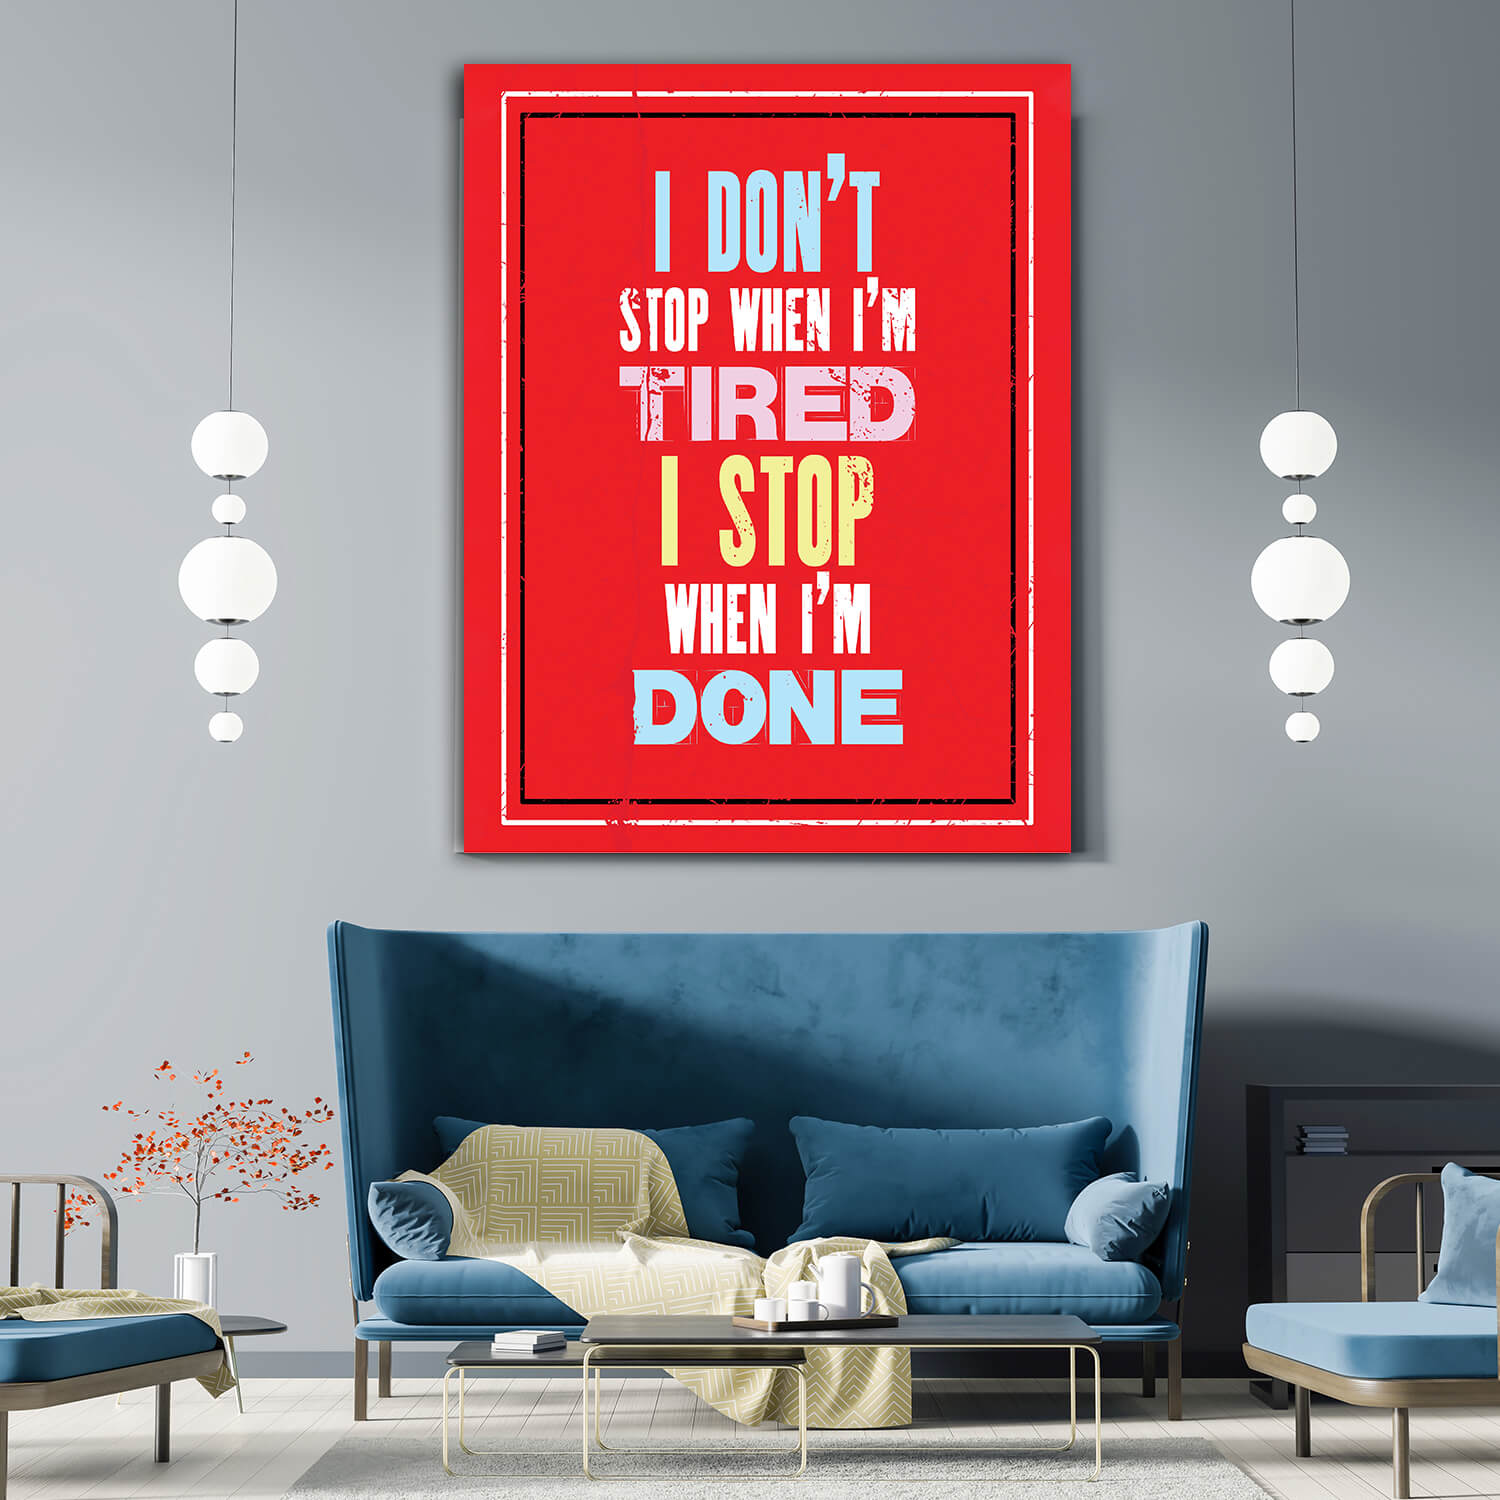 W1_0015_M&P_0017_PRINT__0016_32765868_I DO NOT STOP WHEN I AM TIRED I STOP WHEN I AM DONE QUOTE AOA10839